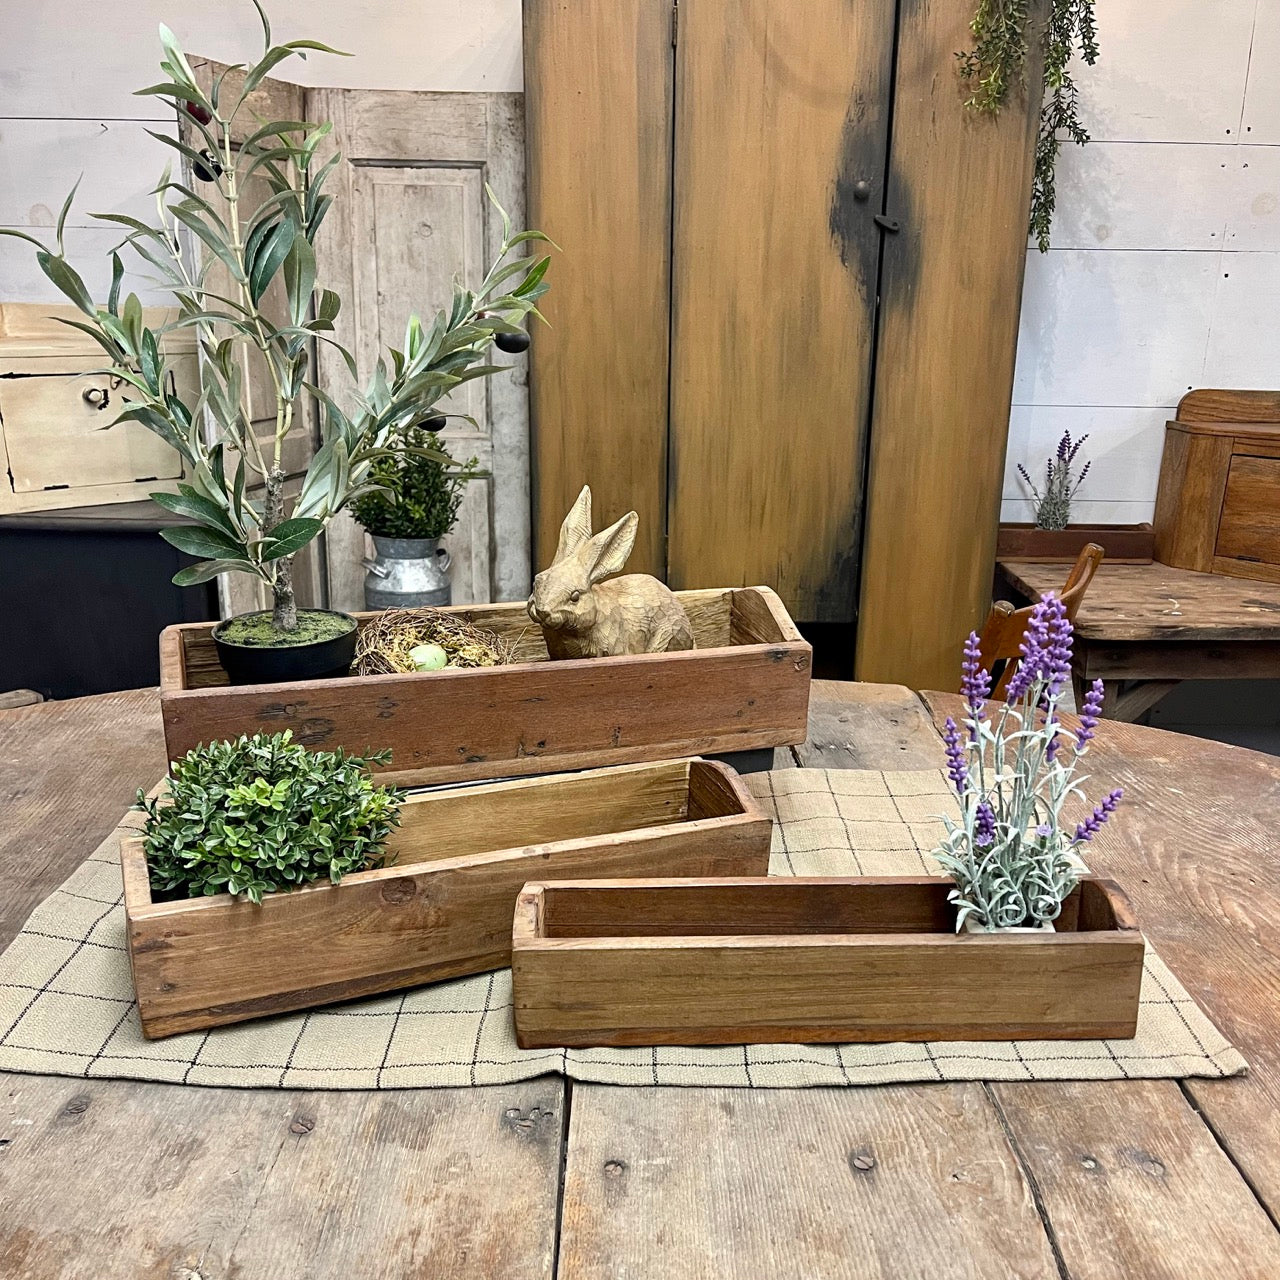 Reclaimed Wooden Boxes | Set of 3 | FREE Half Sphere INCLUDED - Limited TIME!